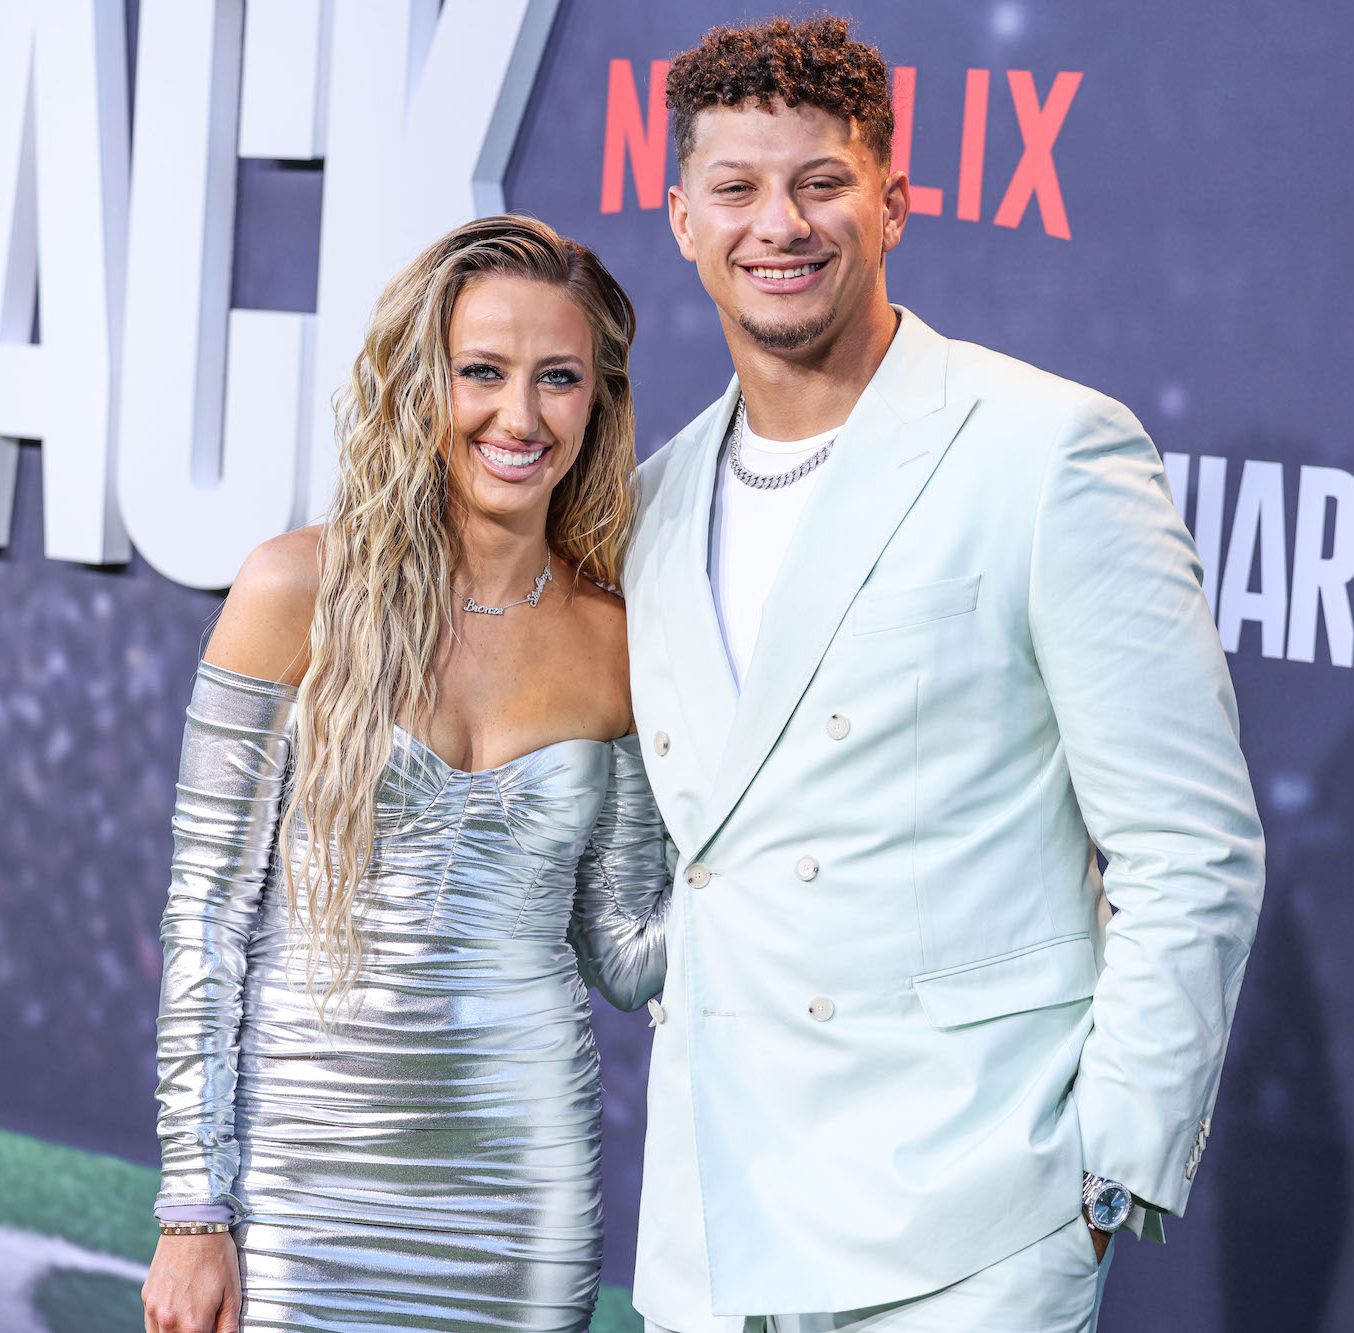 Patrick Mahomes and His Fiancé Brittany Matthews' Love Story